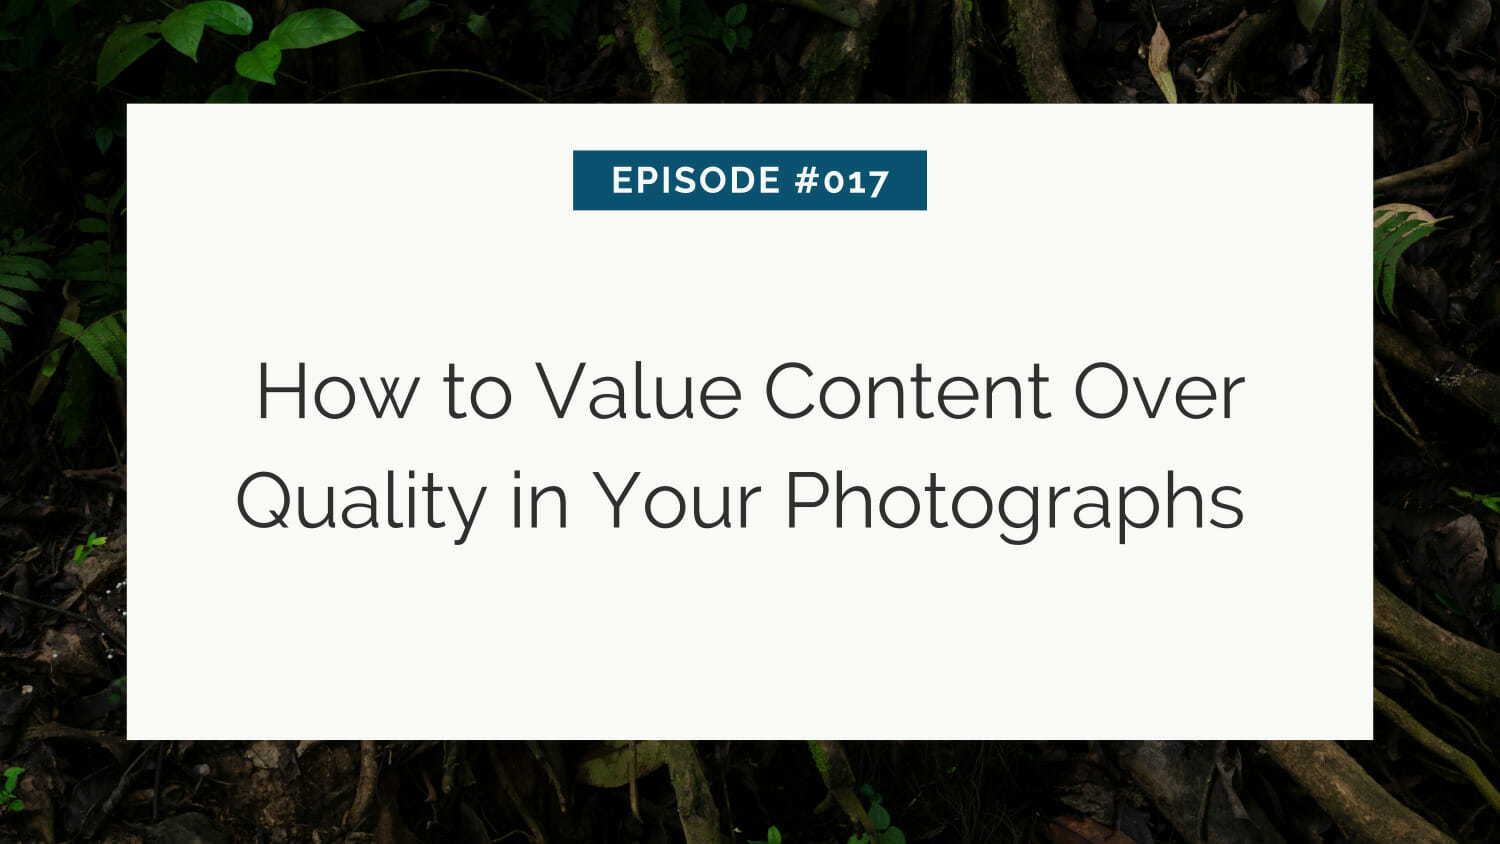 Slide with title "episode #017: how to value content over quality in your photographs" on a backdrop of leaves.